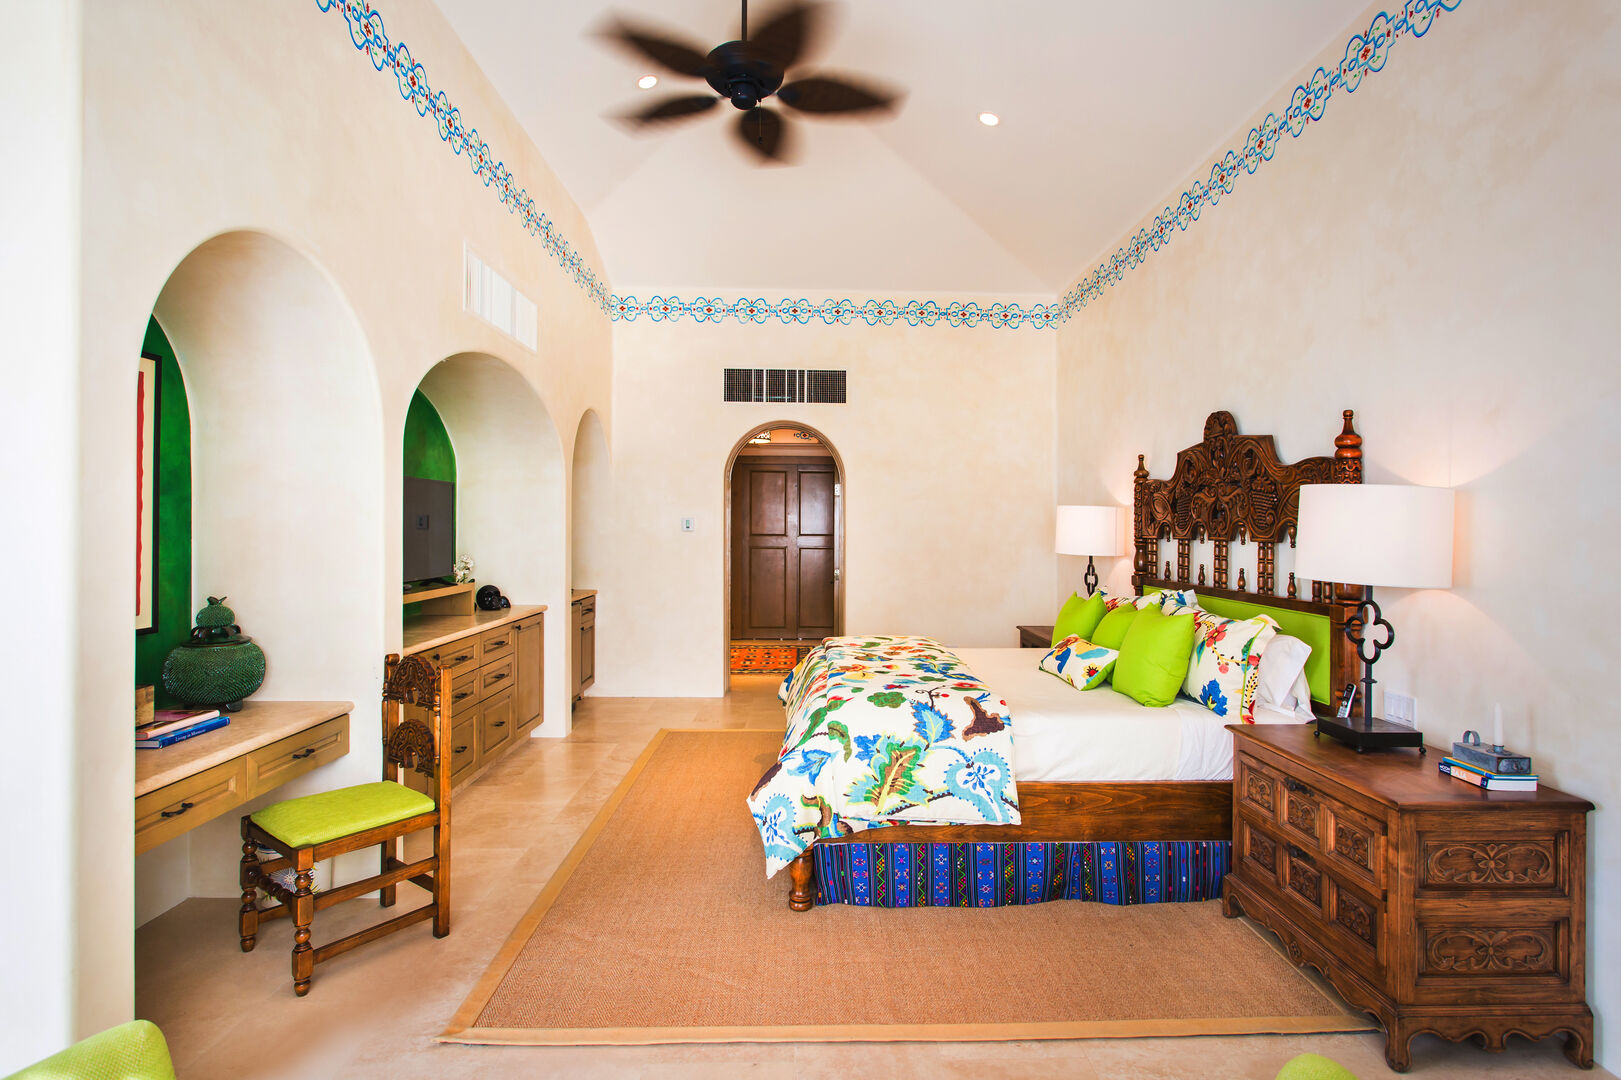 Bedroom with ceiling fan and high ceilings